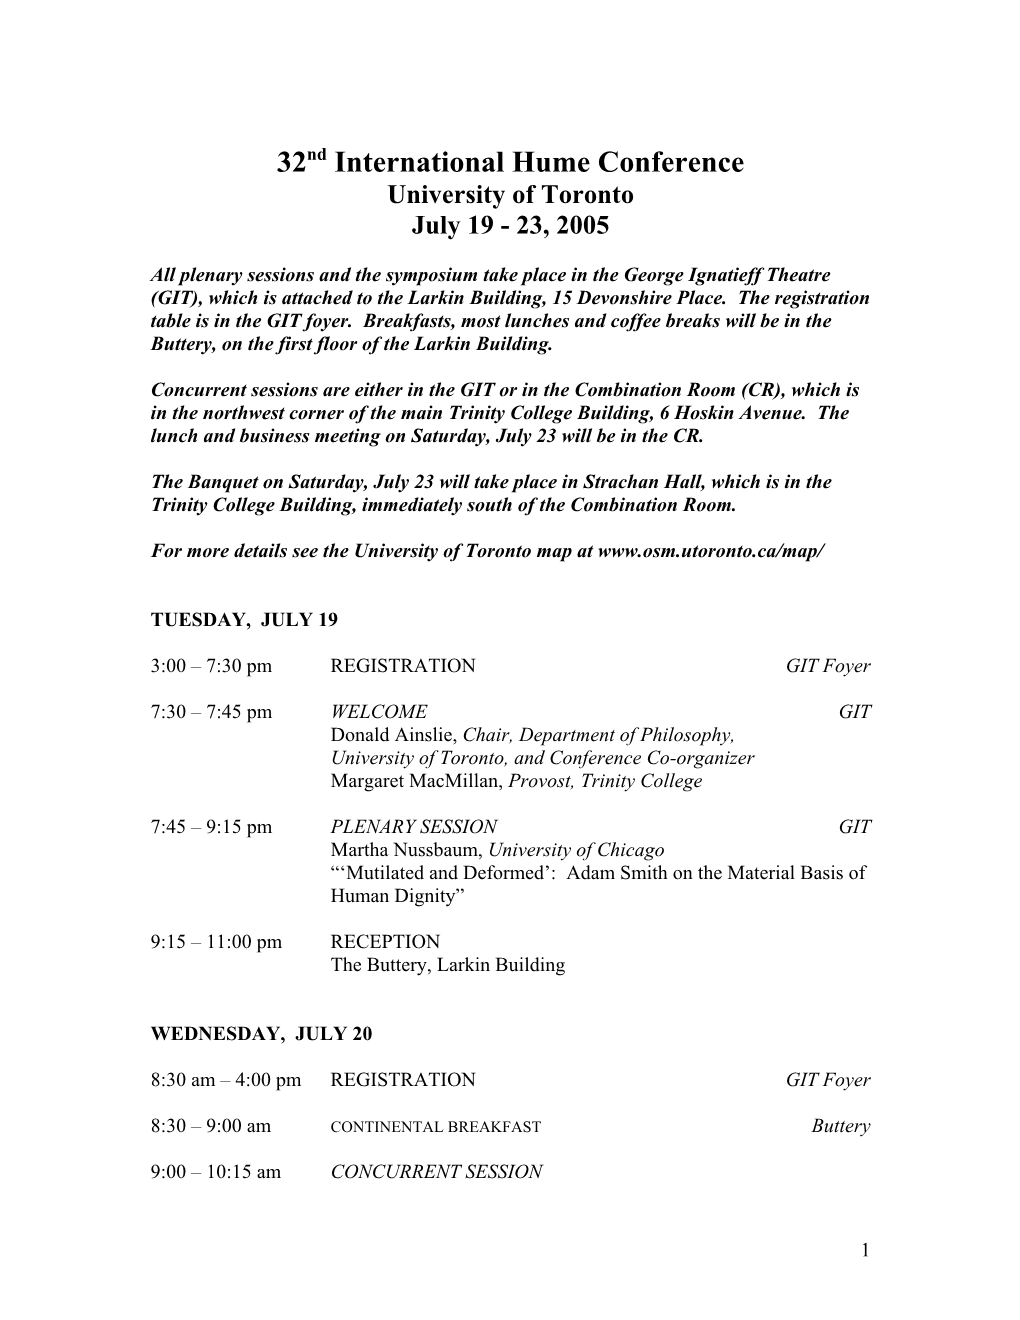 Provisional Schedule, 32Nd Hume Society Conference, July 19-23 2005